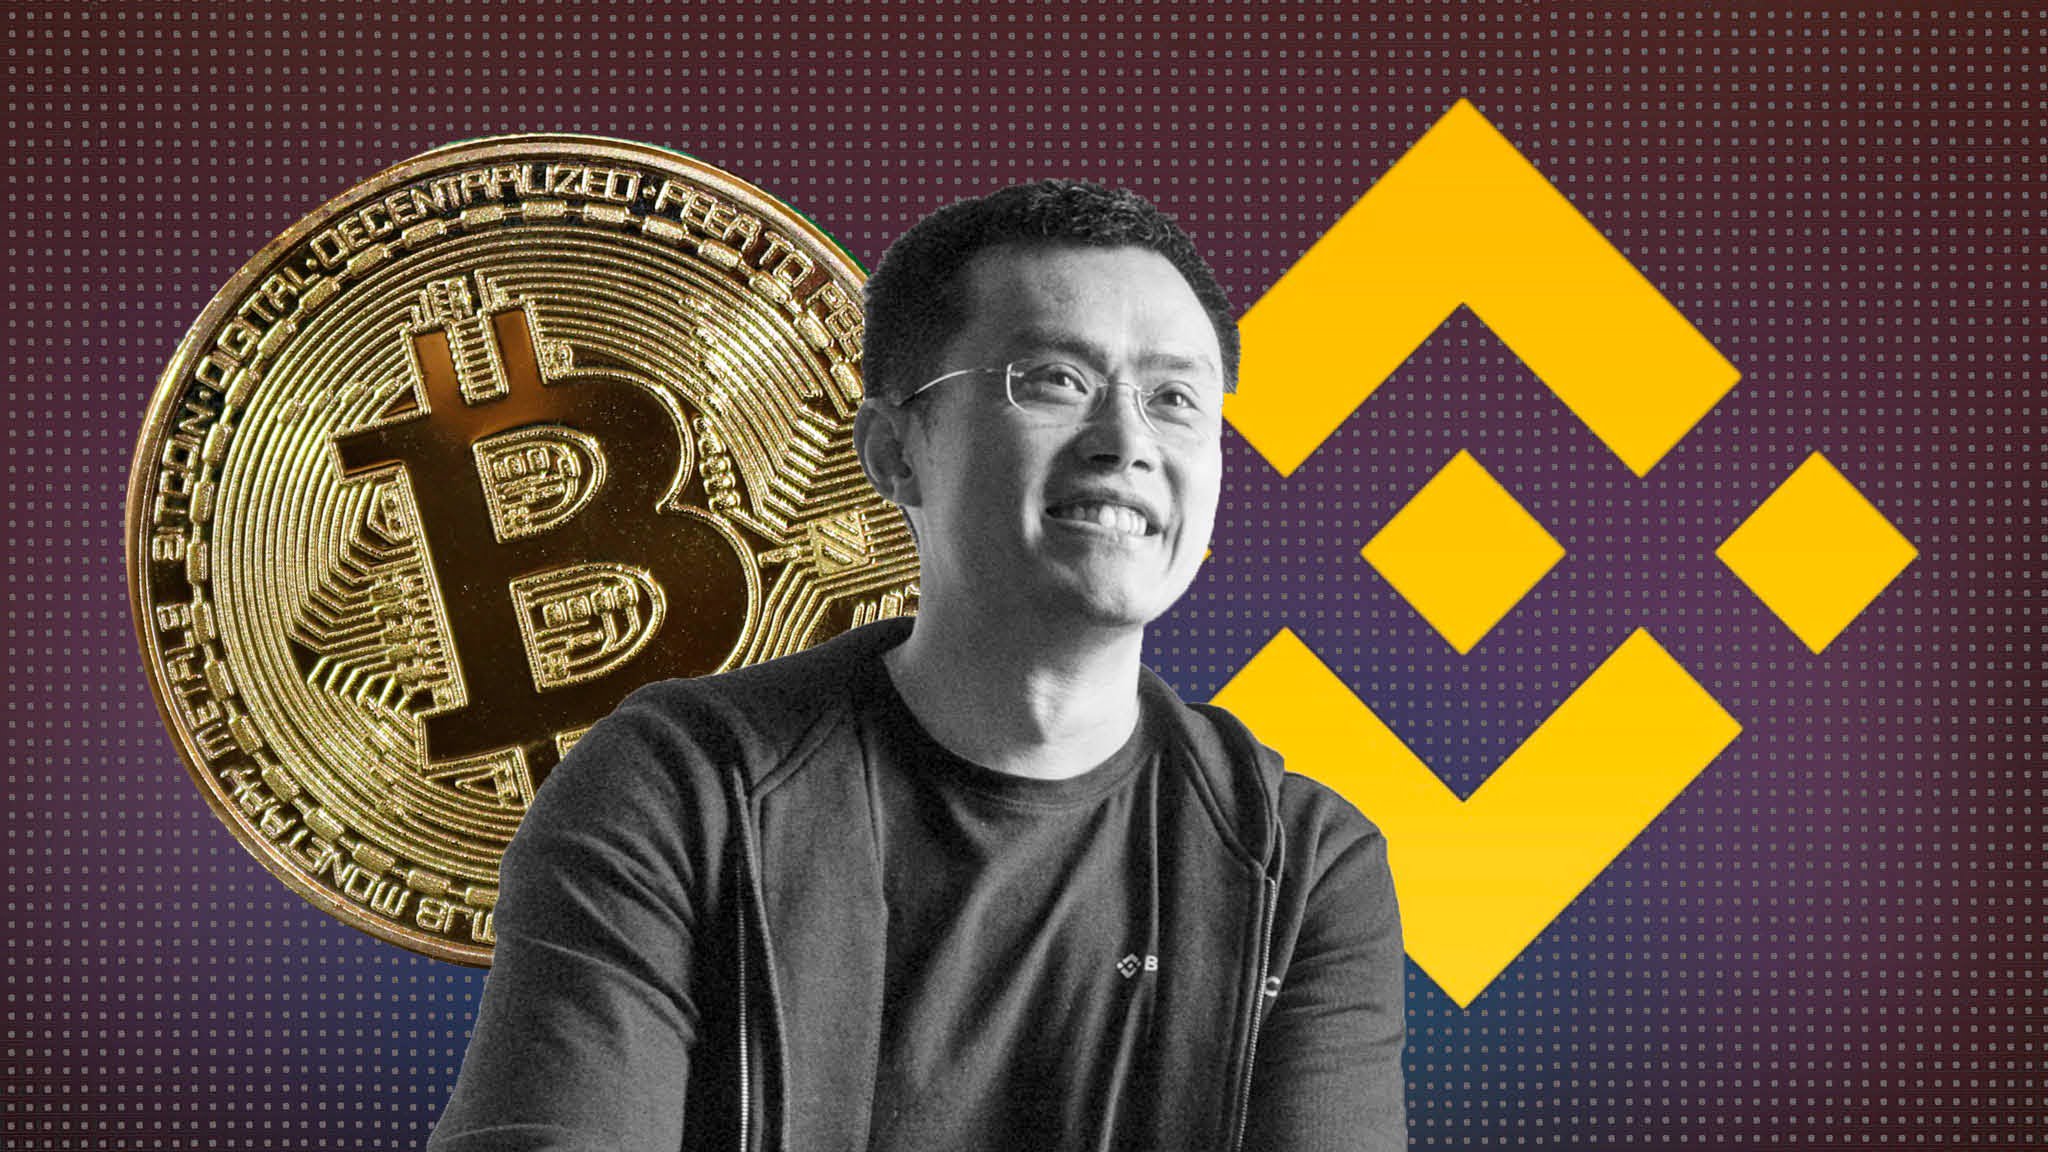 Binance CEO says this is not enough: Bitcoin adoption 6